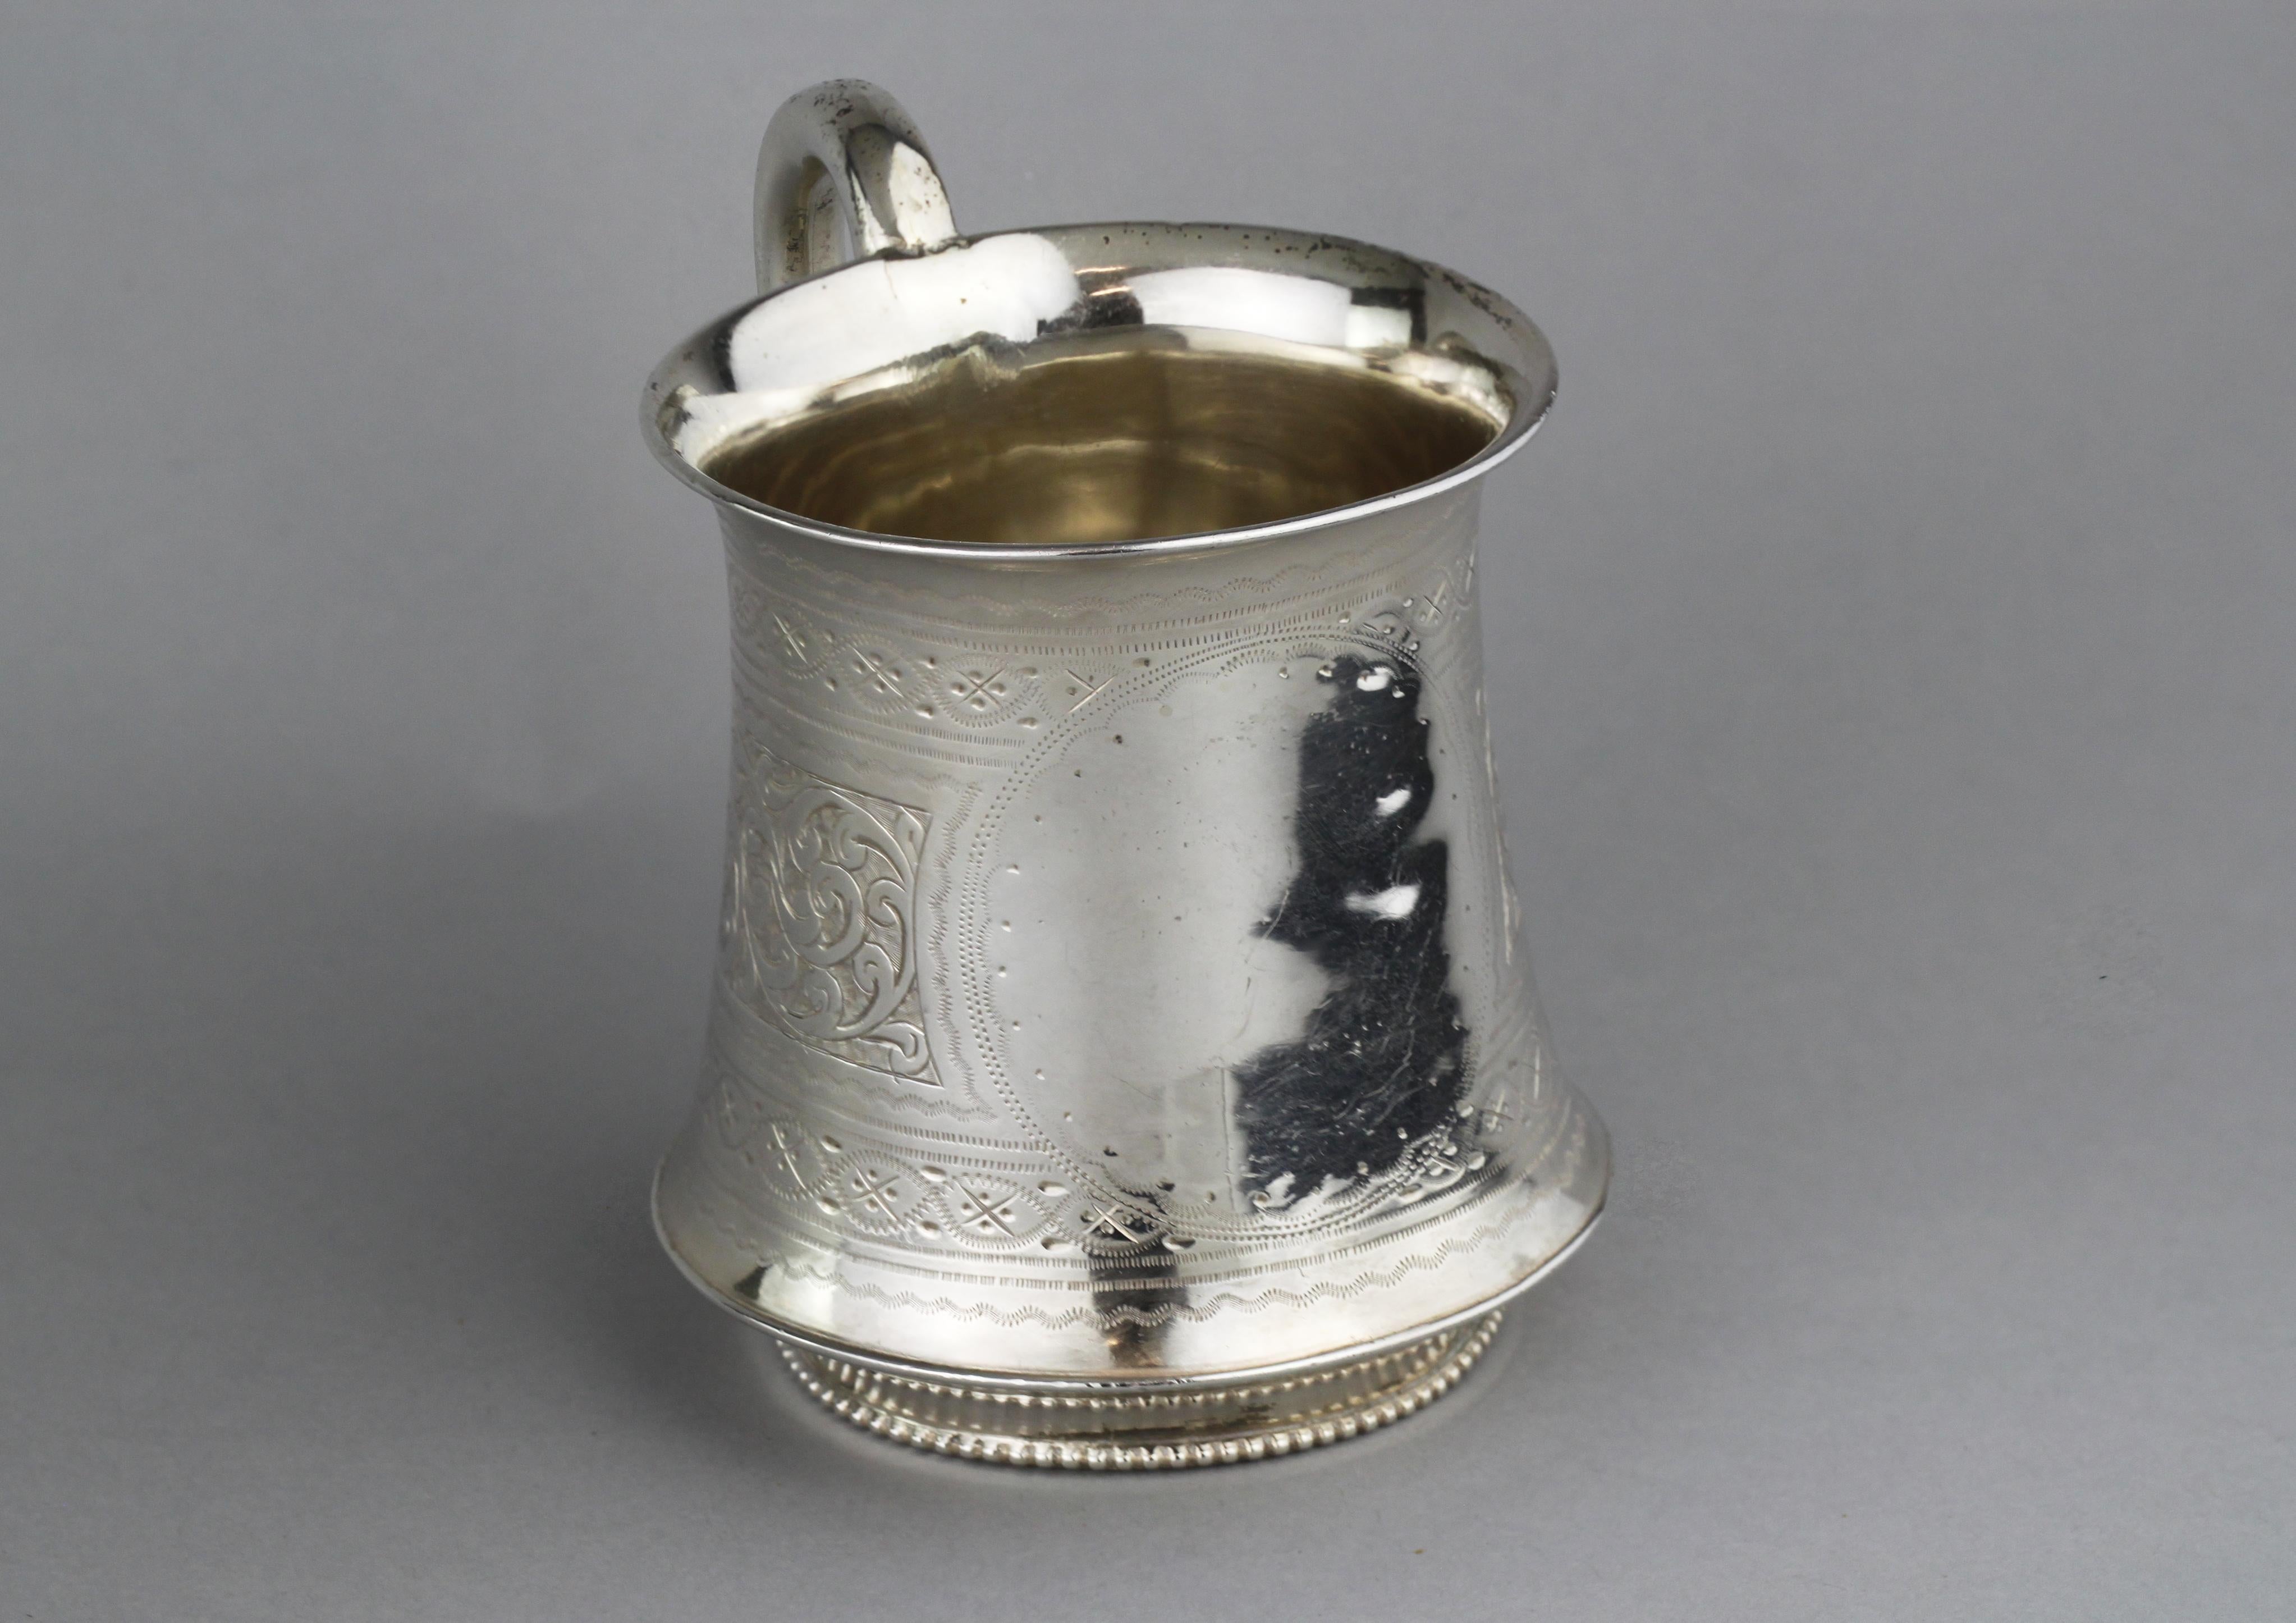 Antique Victorian sterling silver cup
Maker: Hilliard & Thomason
Made in Birmingham 1894
Fully hallmarked.

Dimensions:
Length 9.7 cm
Width 7 cm
Height 8.2 cm
Weight: 82 grams

Condition: Minor wear from general usage, no damage,